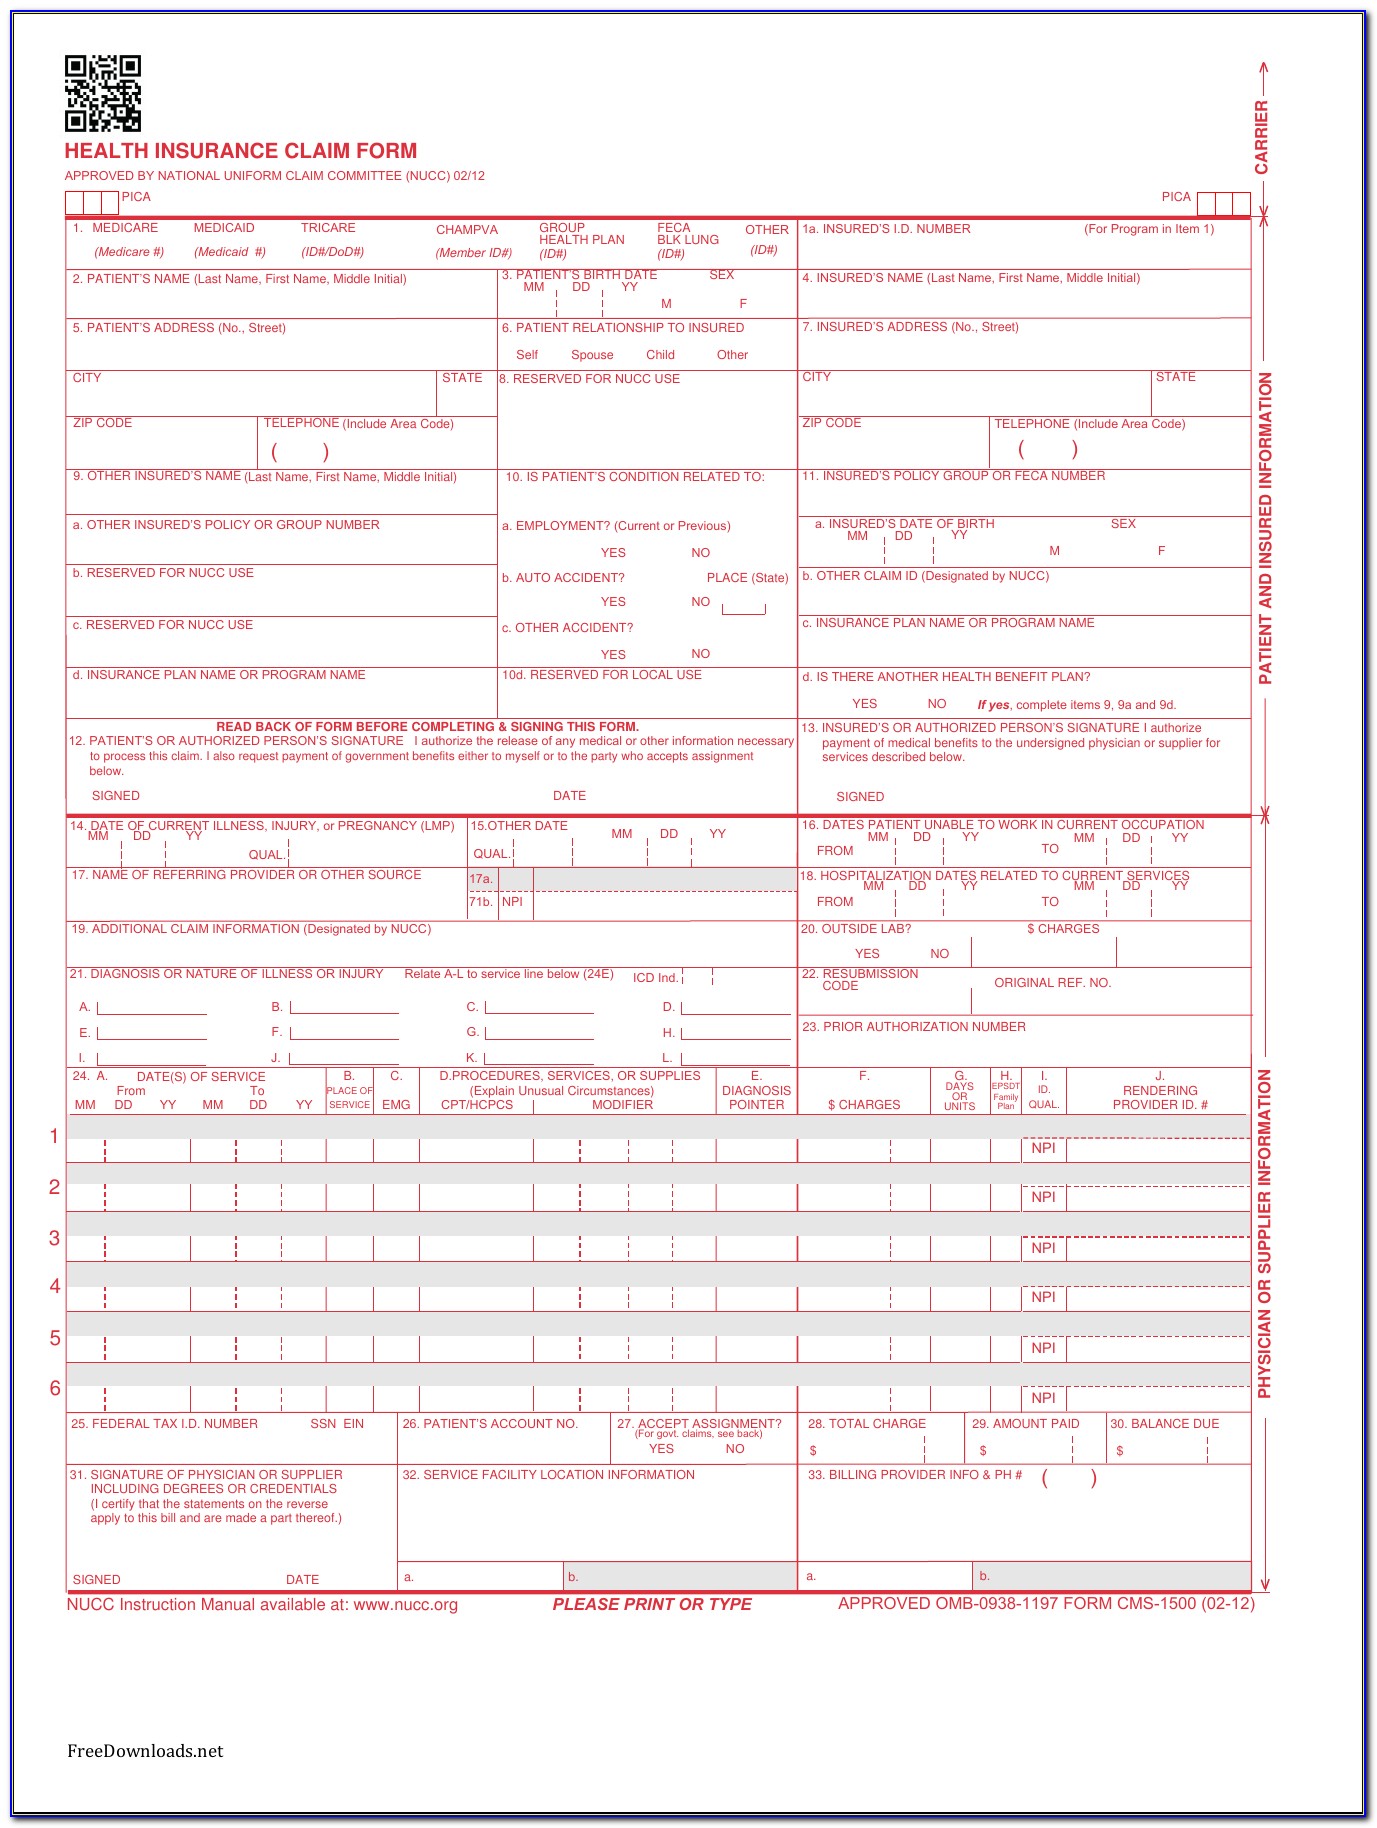 Cms 1500 Claim Form Free Download